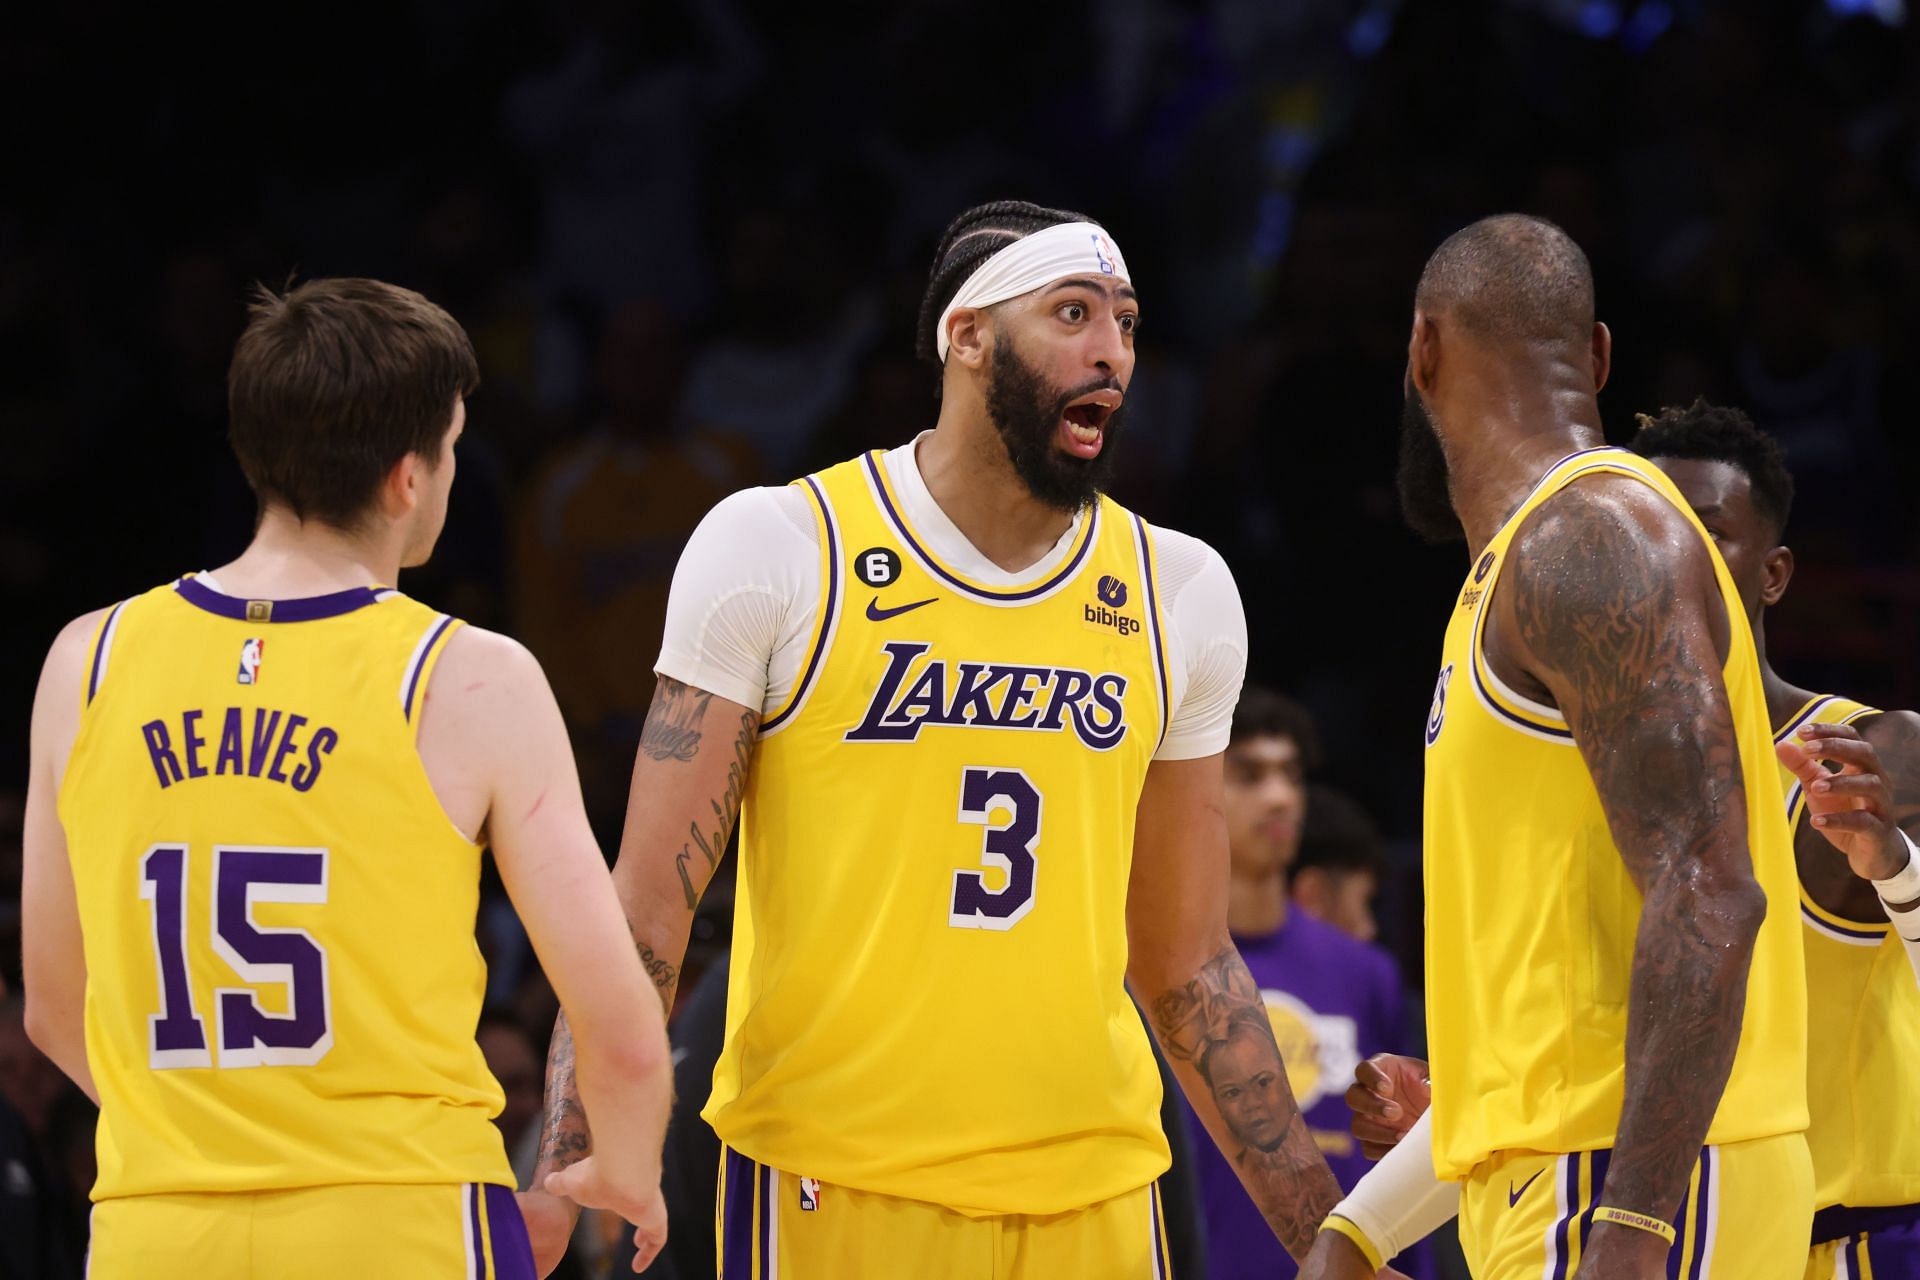 (L-R) Austin Reaves, Anthony Davis and LeBron James of the LA Lakers